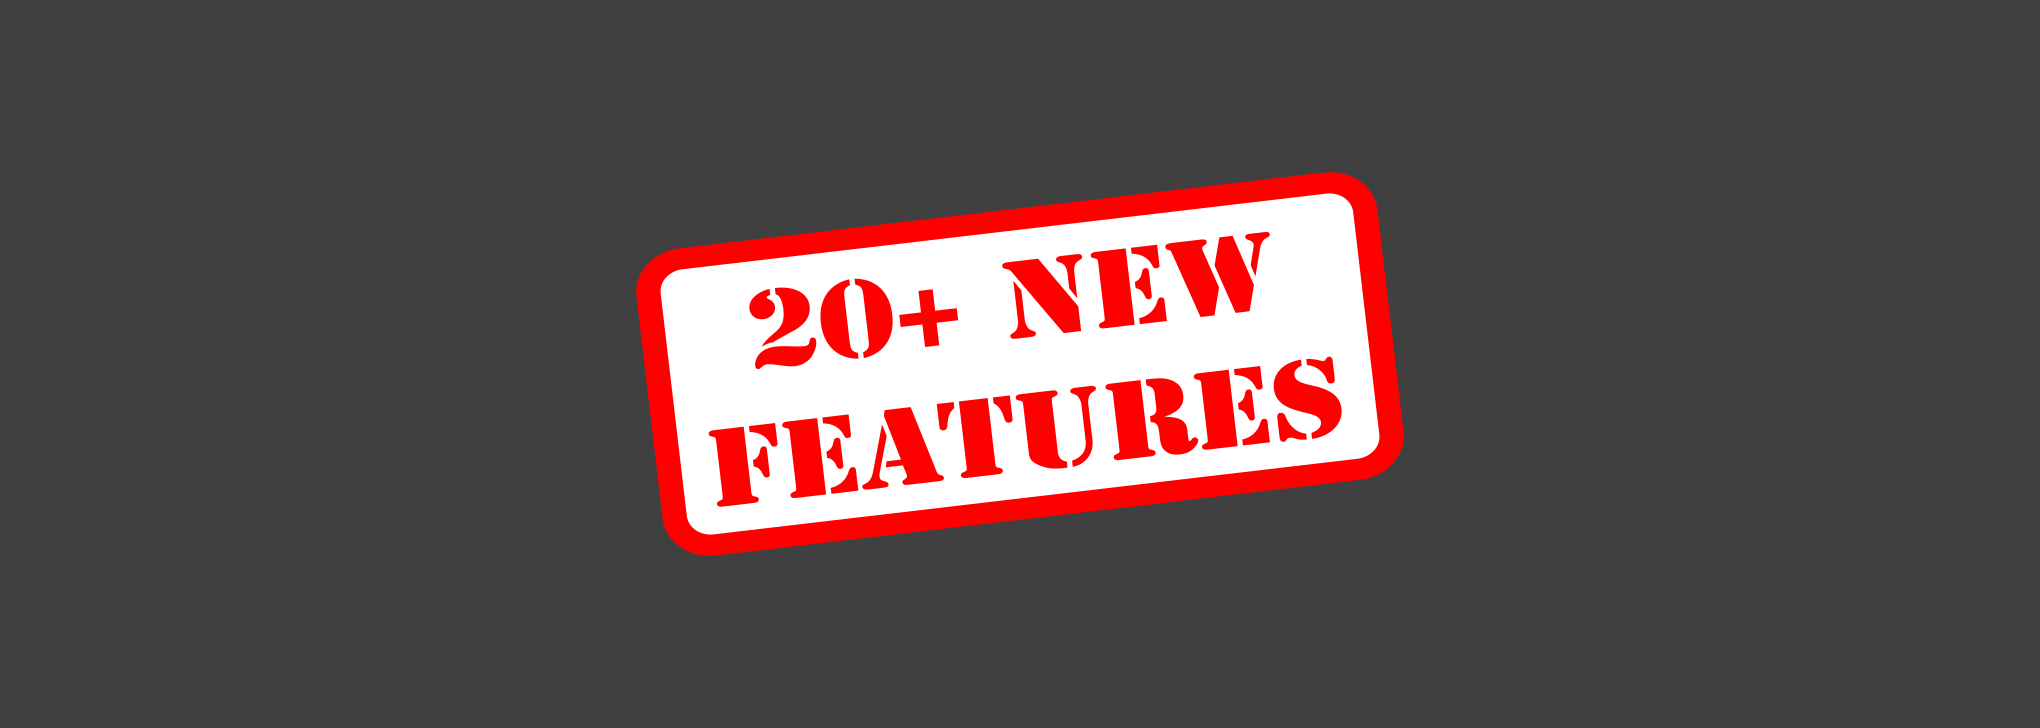 20+ New Features Available Now!